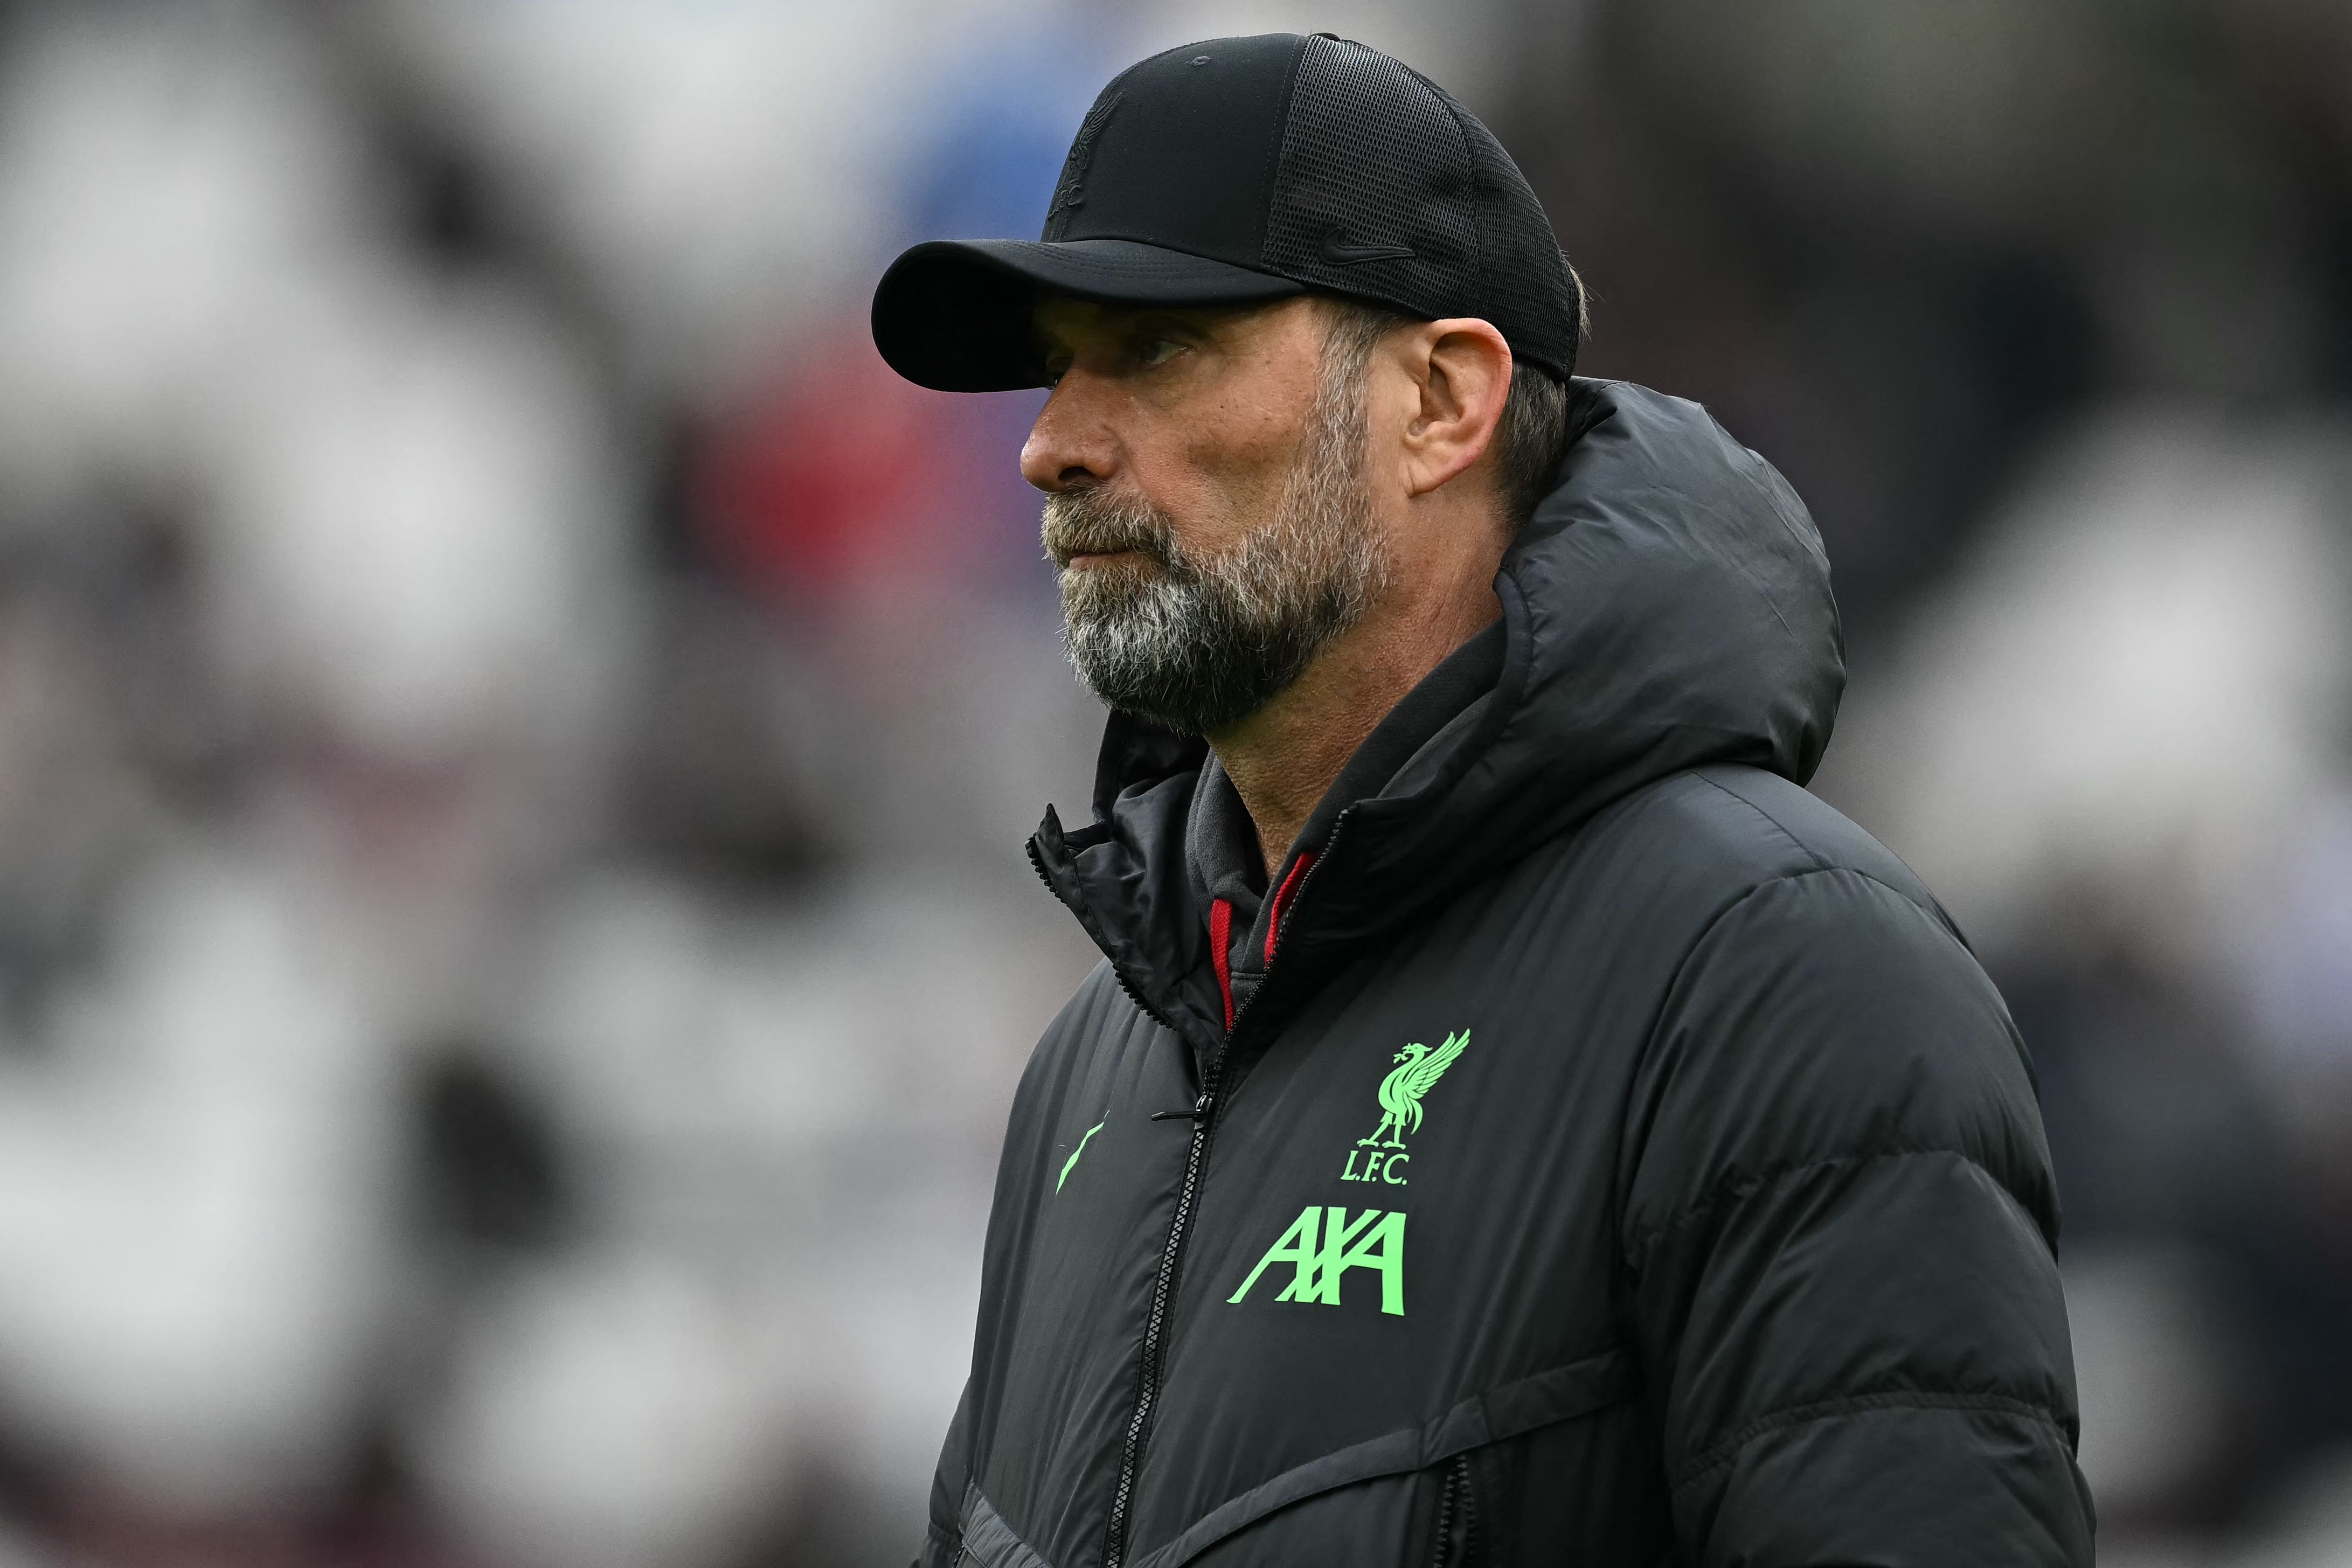 ‘If I do see him…’ – Ex-Liverpool midfielder plans to do one thing if he meets Klopp in person